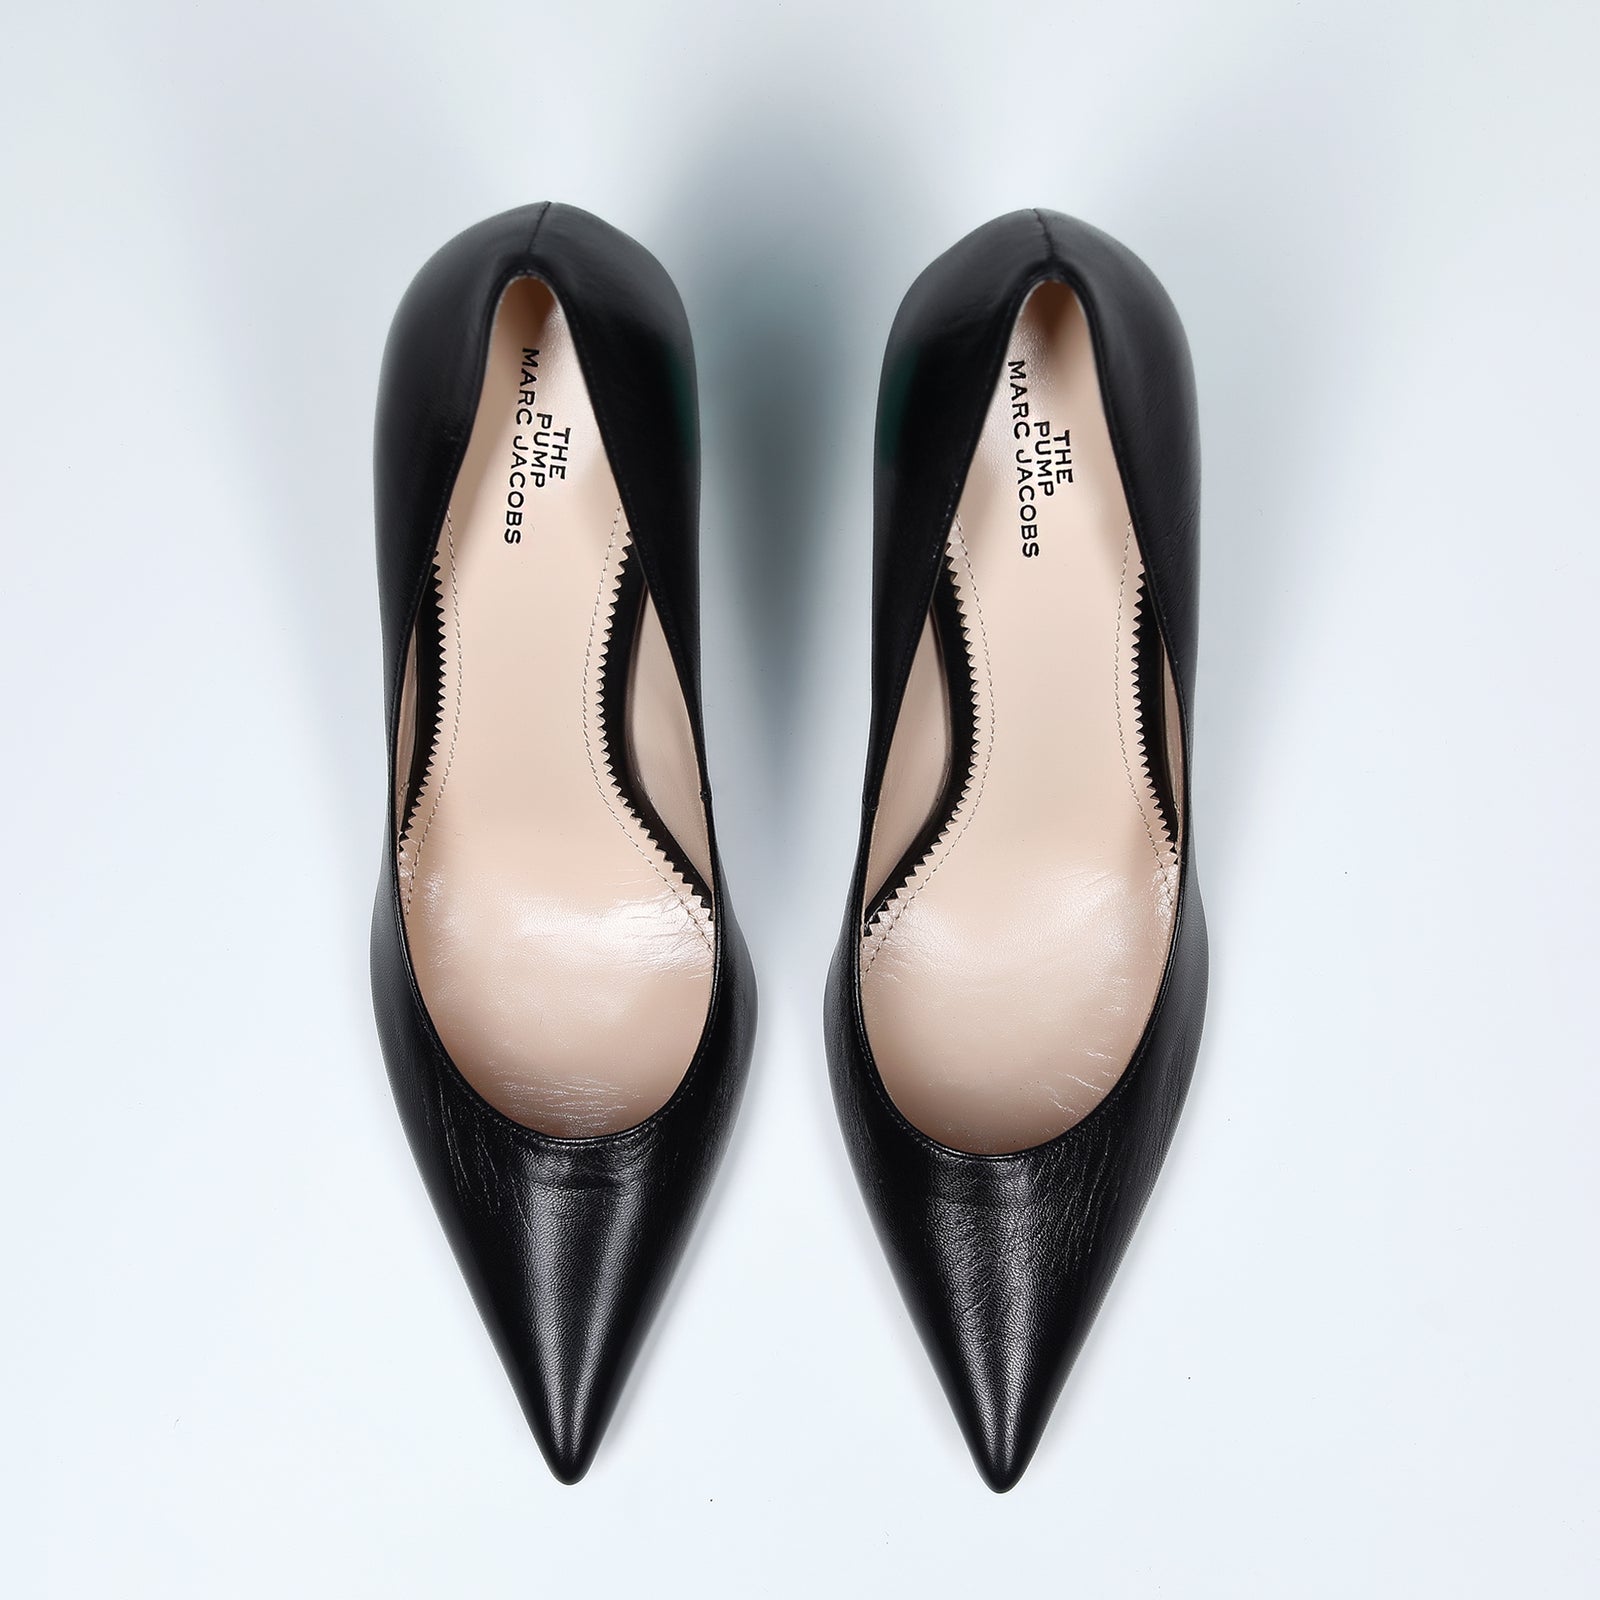 MARC JACOBS SHOES - Yooto